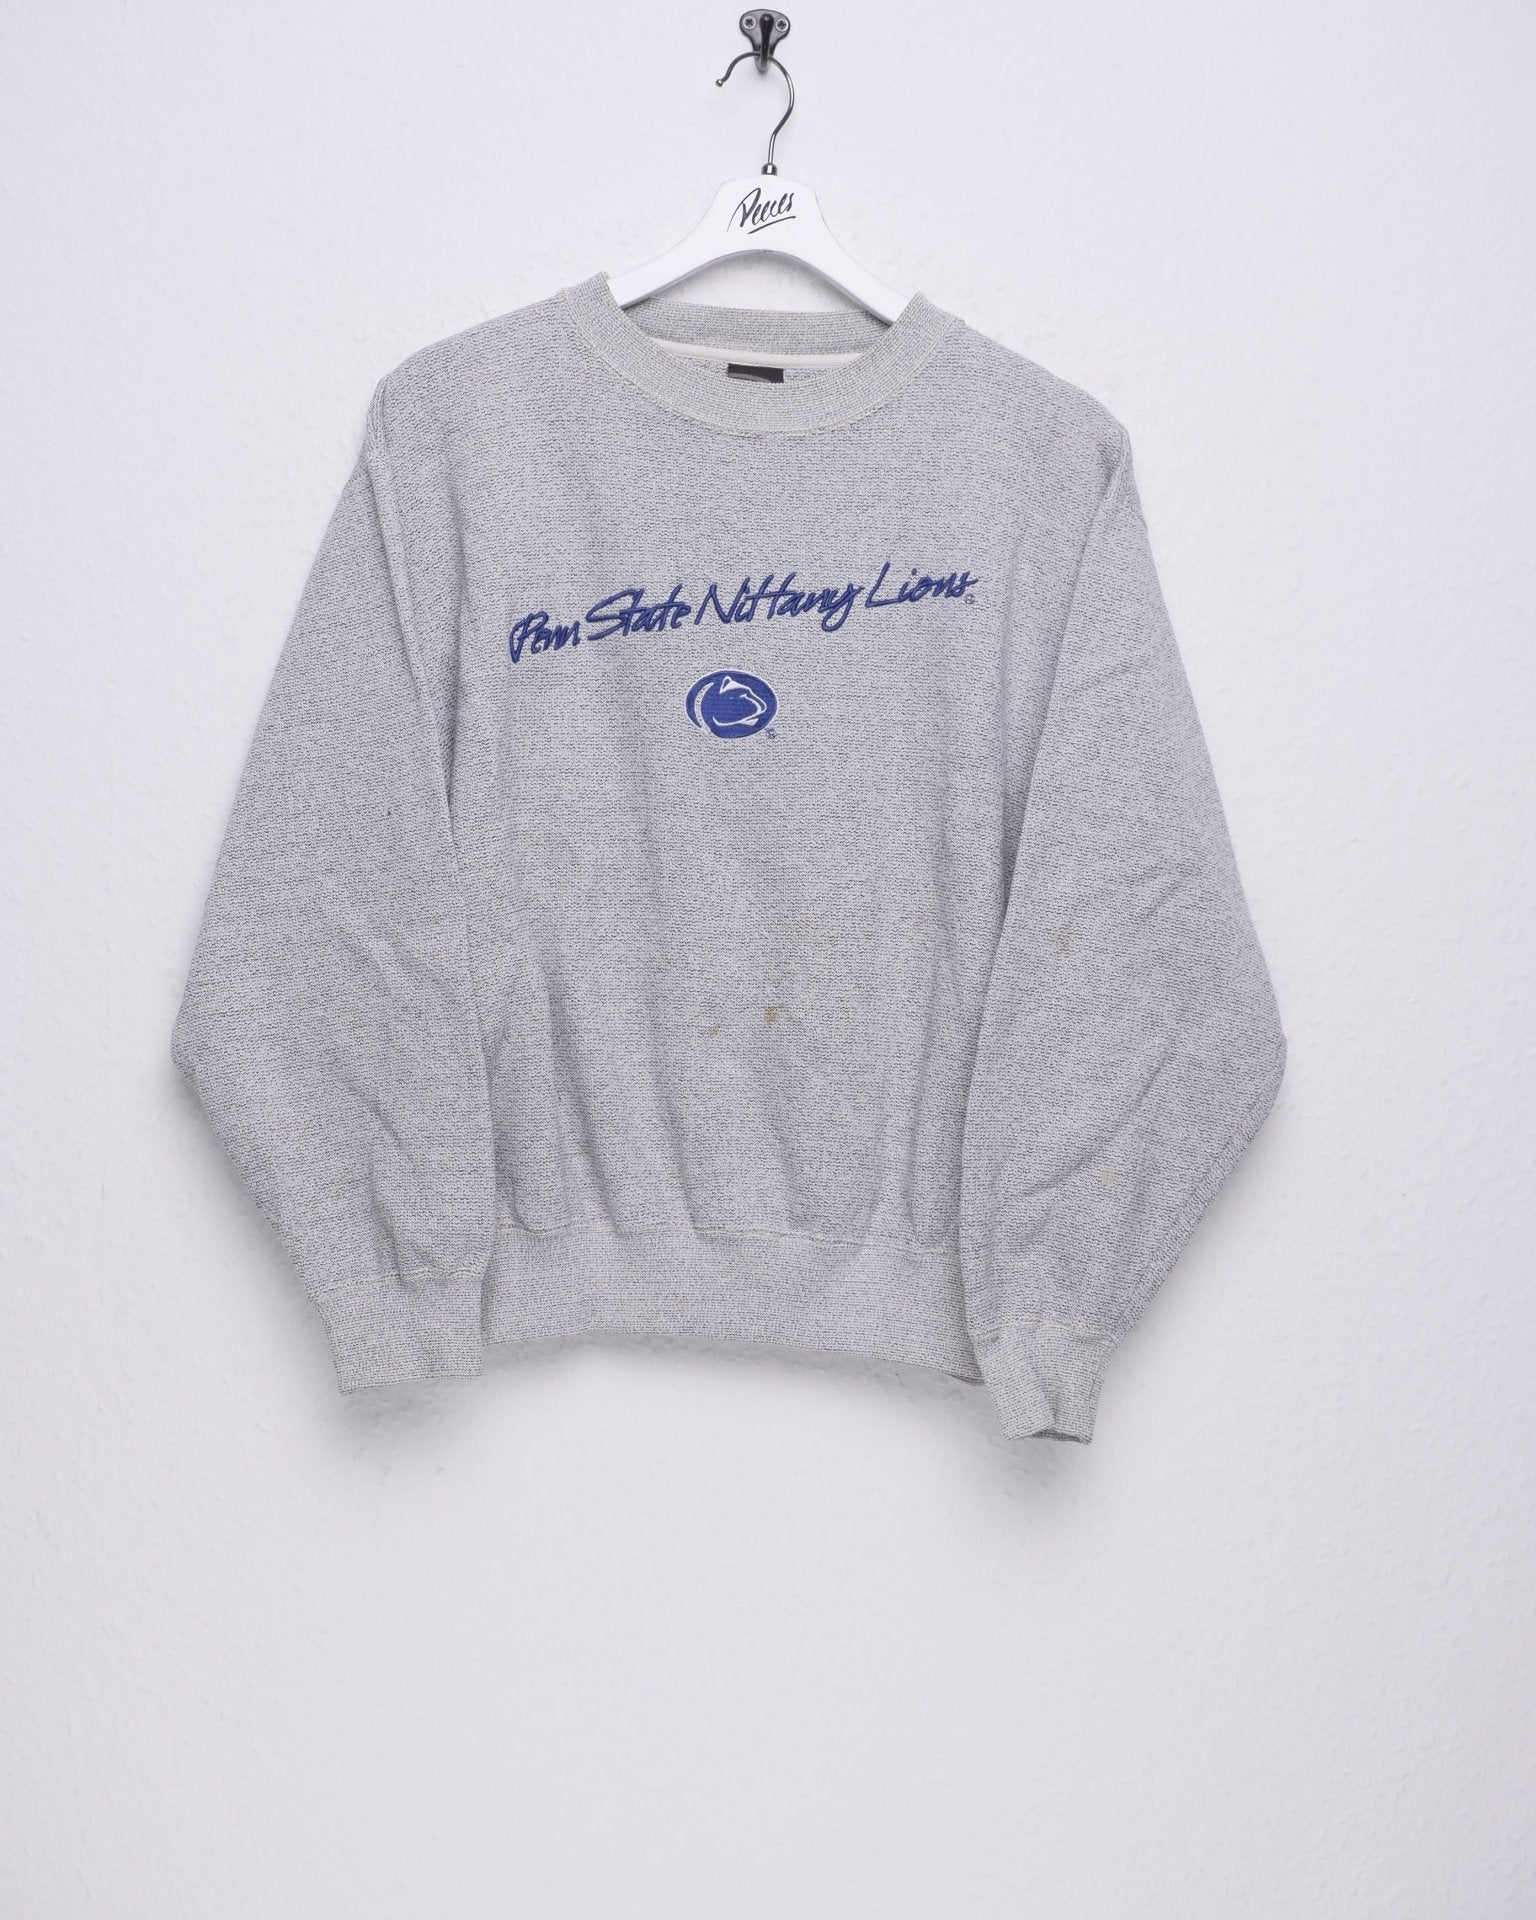 Penn State Nittany Lions embroidered Logo grey Sweater - Peeces